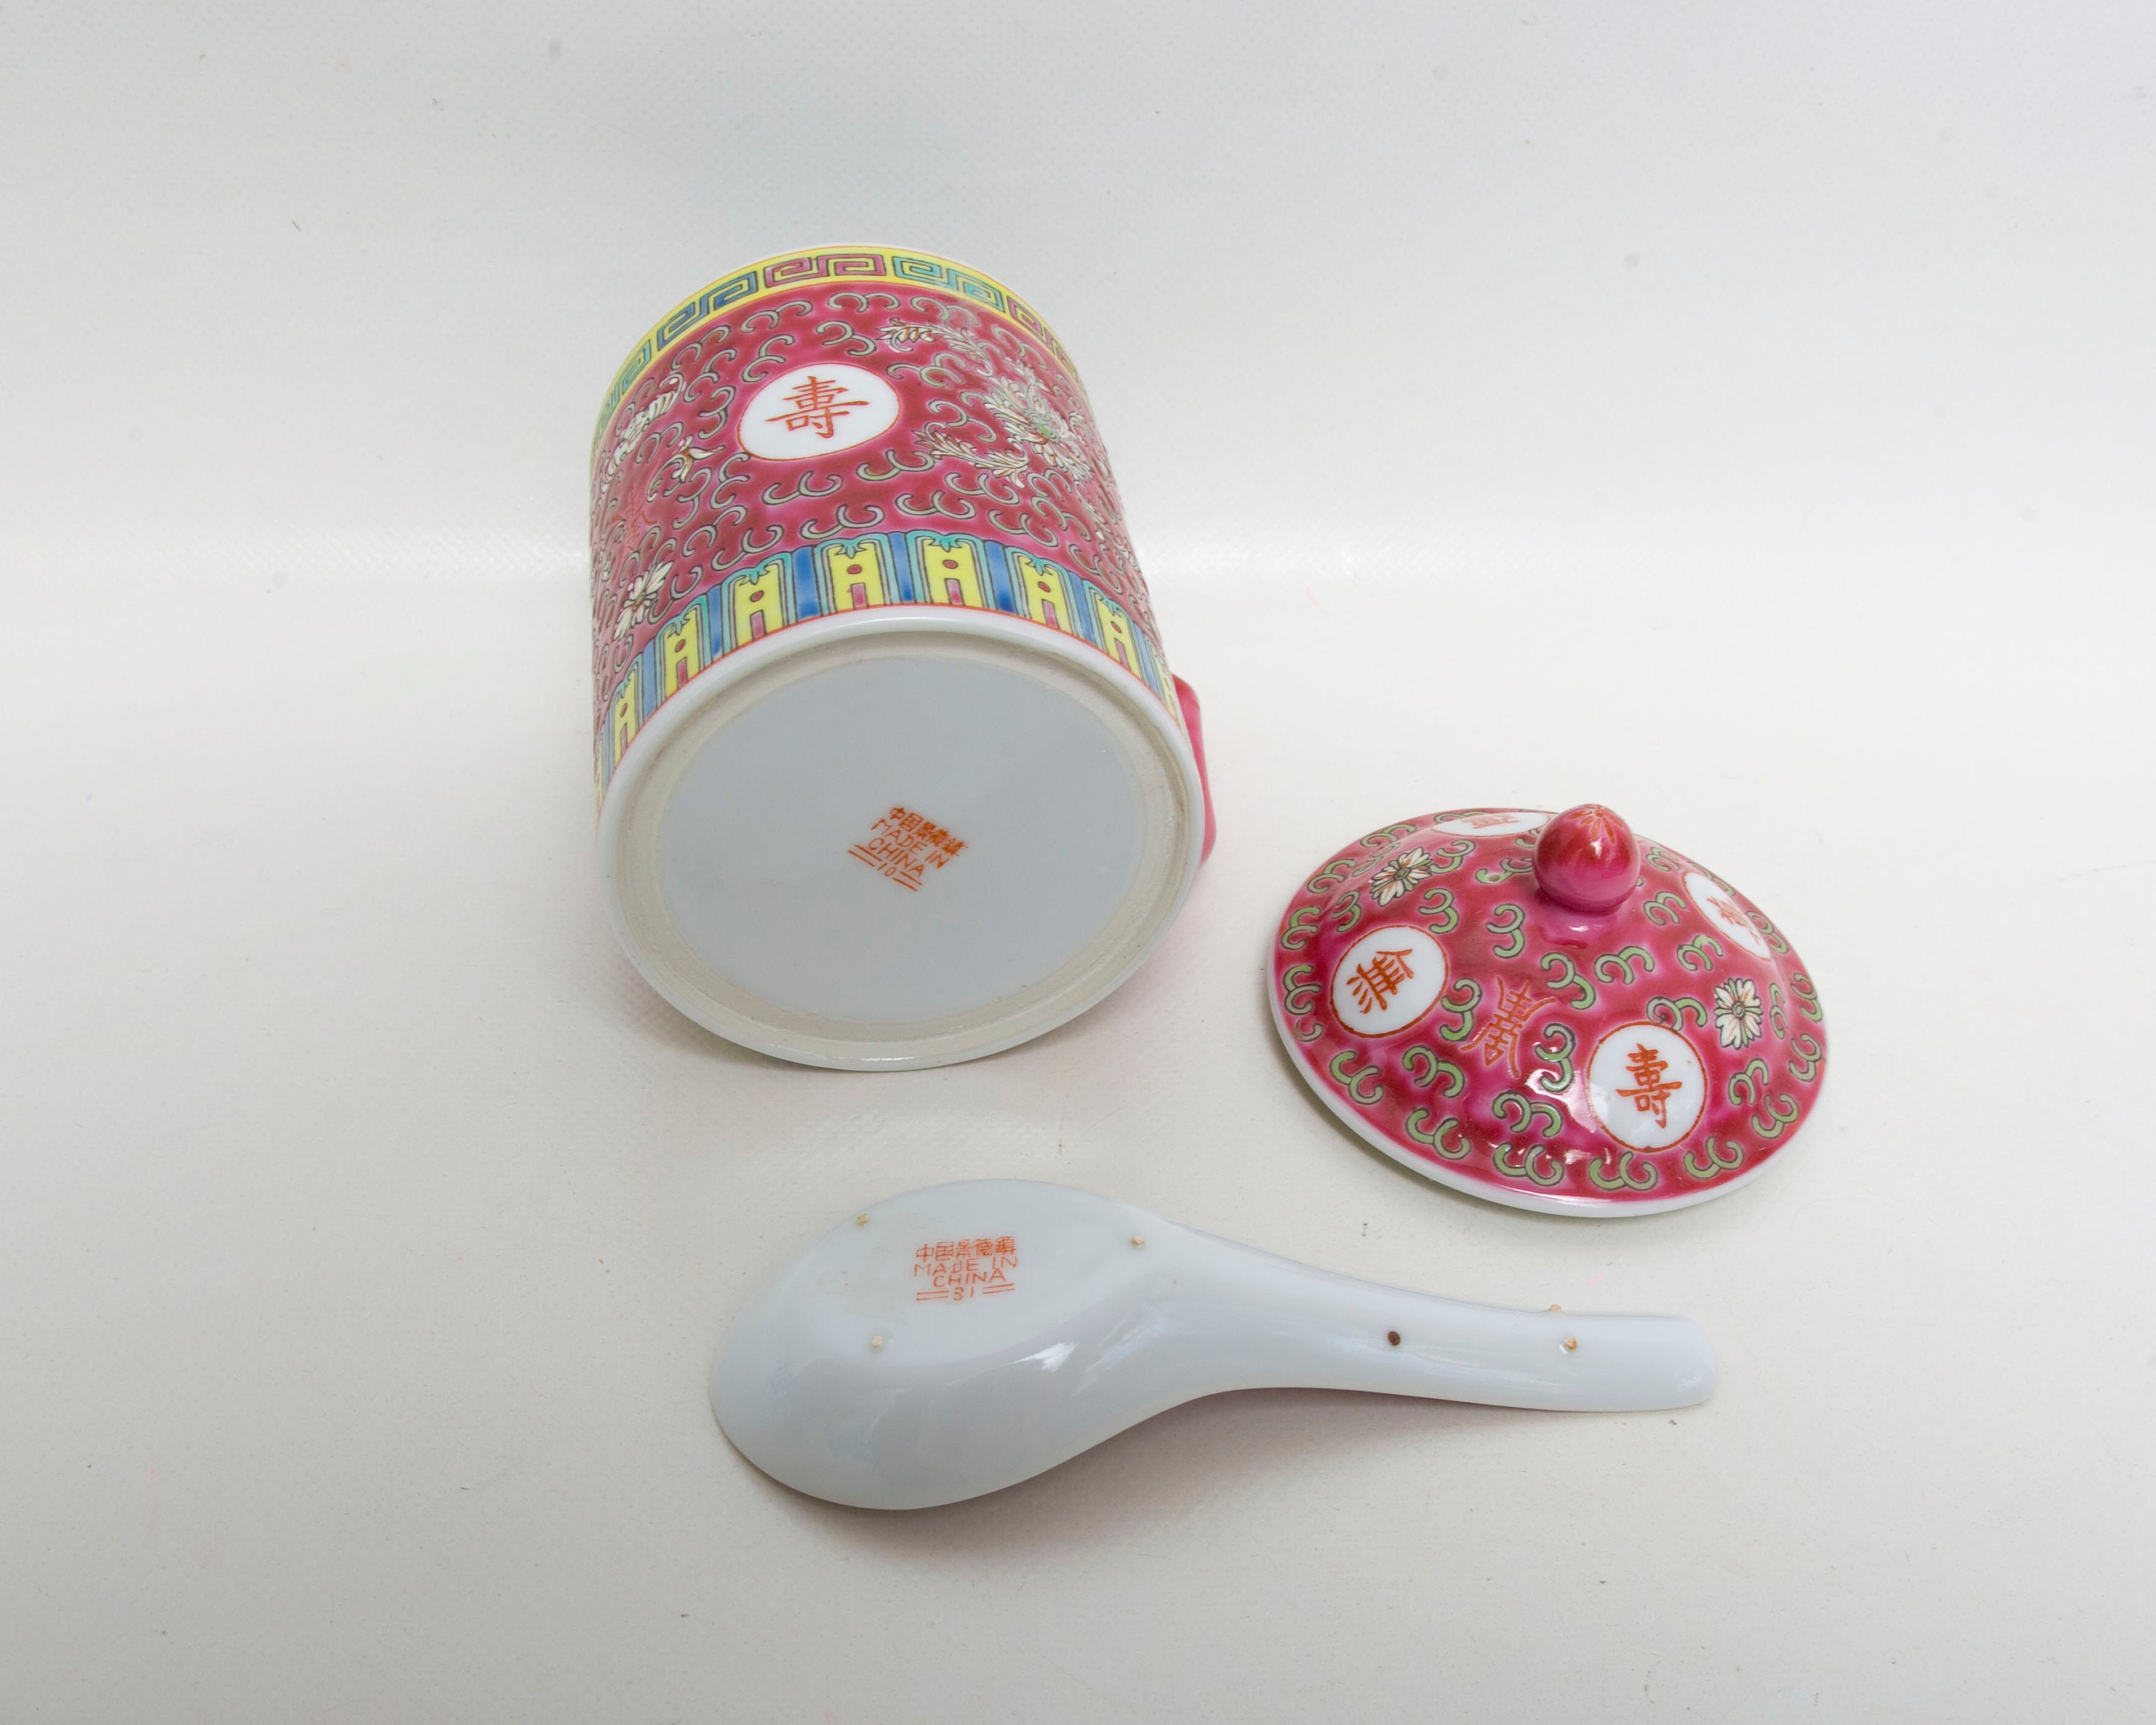 Vintage Zhongguo Jingdezhen Famille Rose Lidded Teacup and Spoon Hand Painted PINK Floral Asian Design Chinese Porcelain Mug With Lid